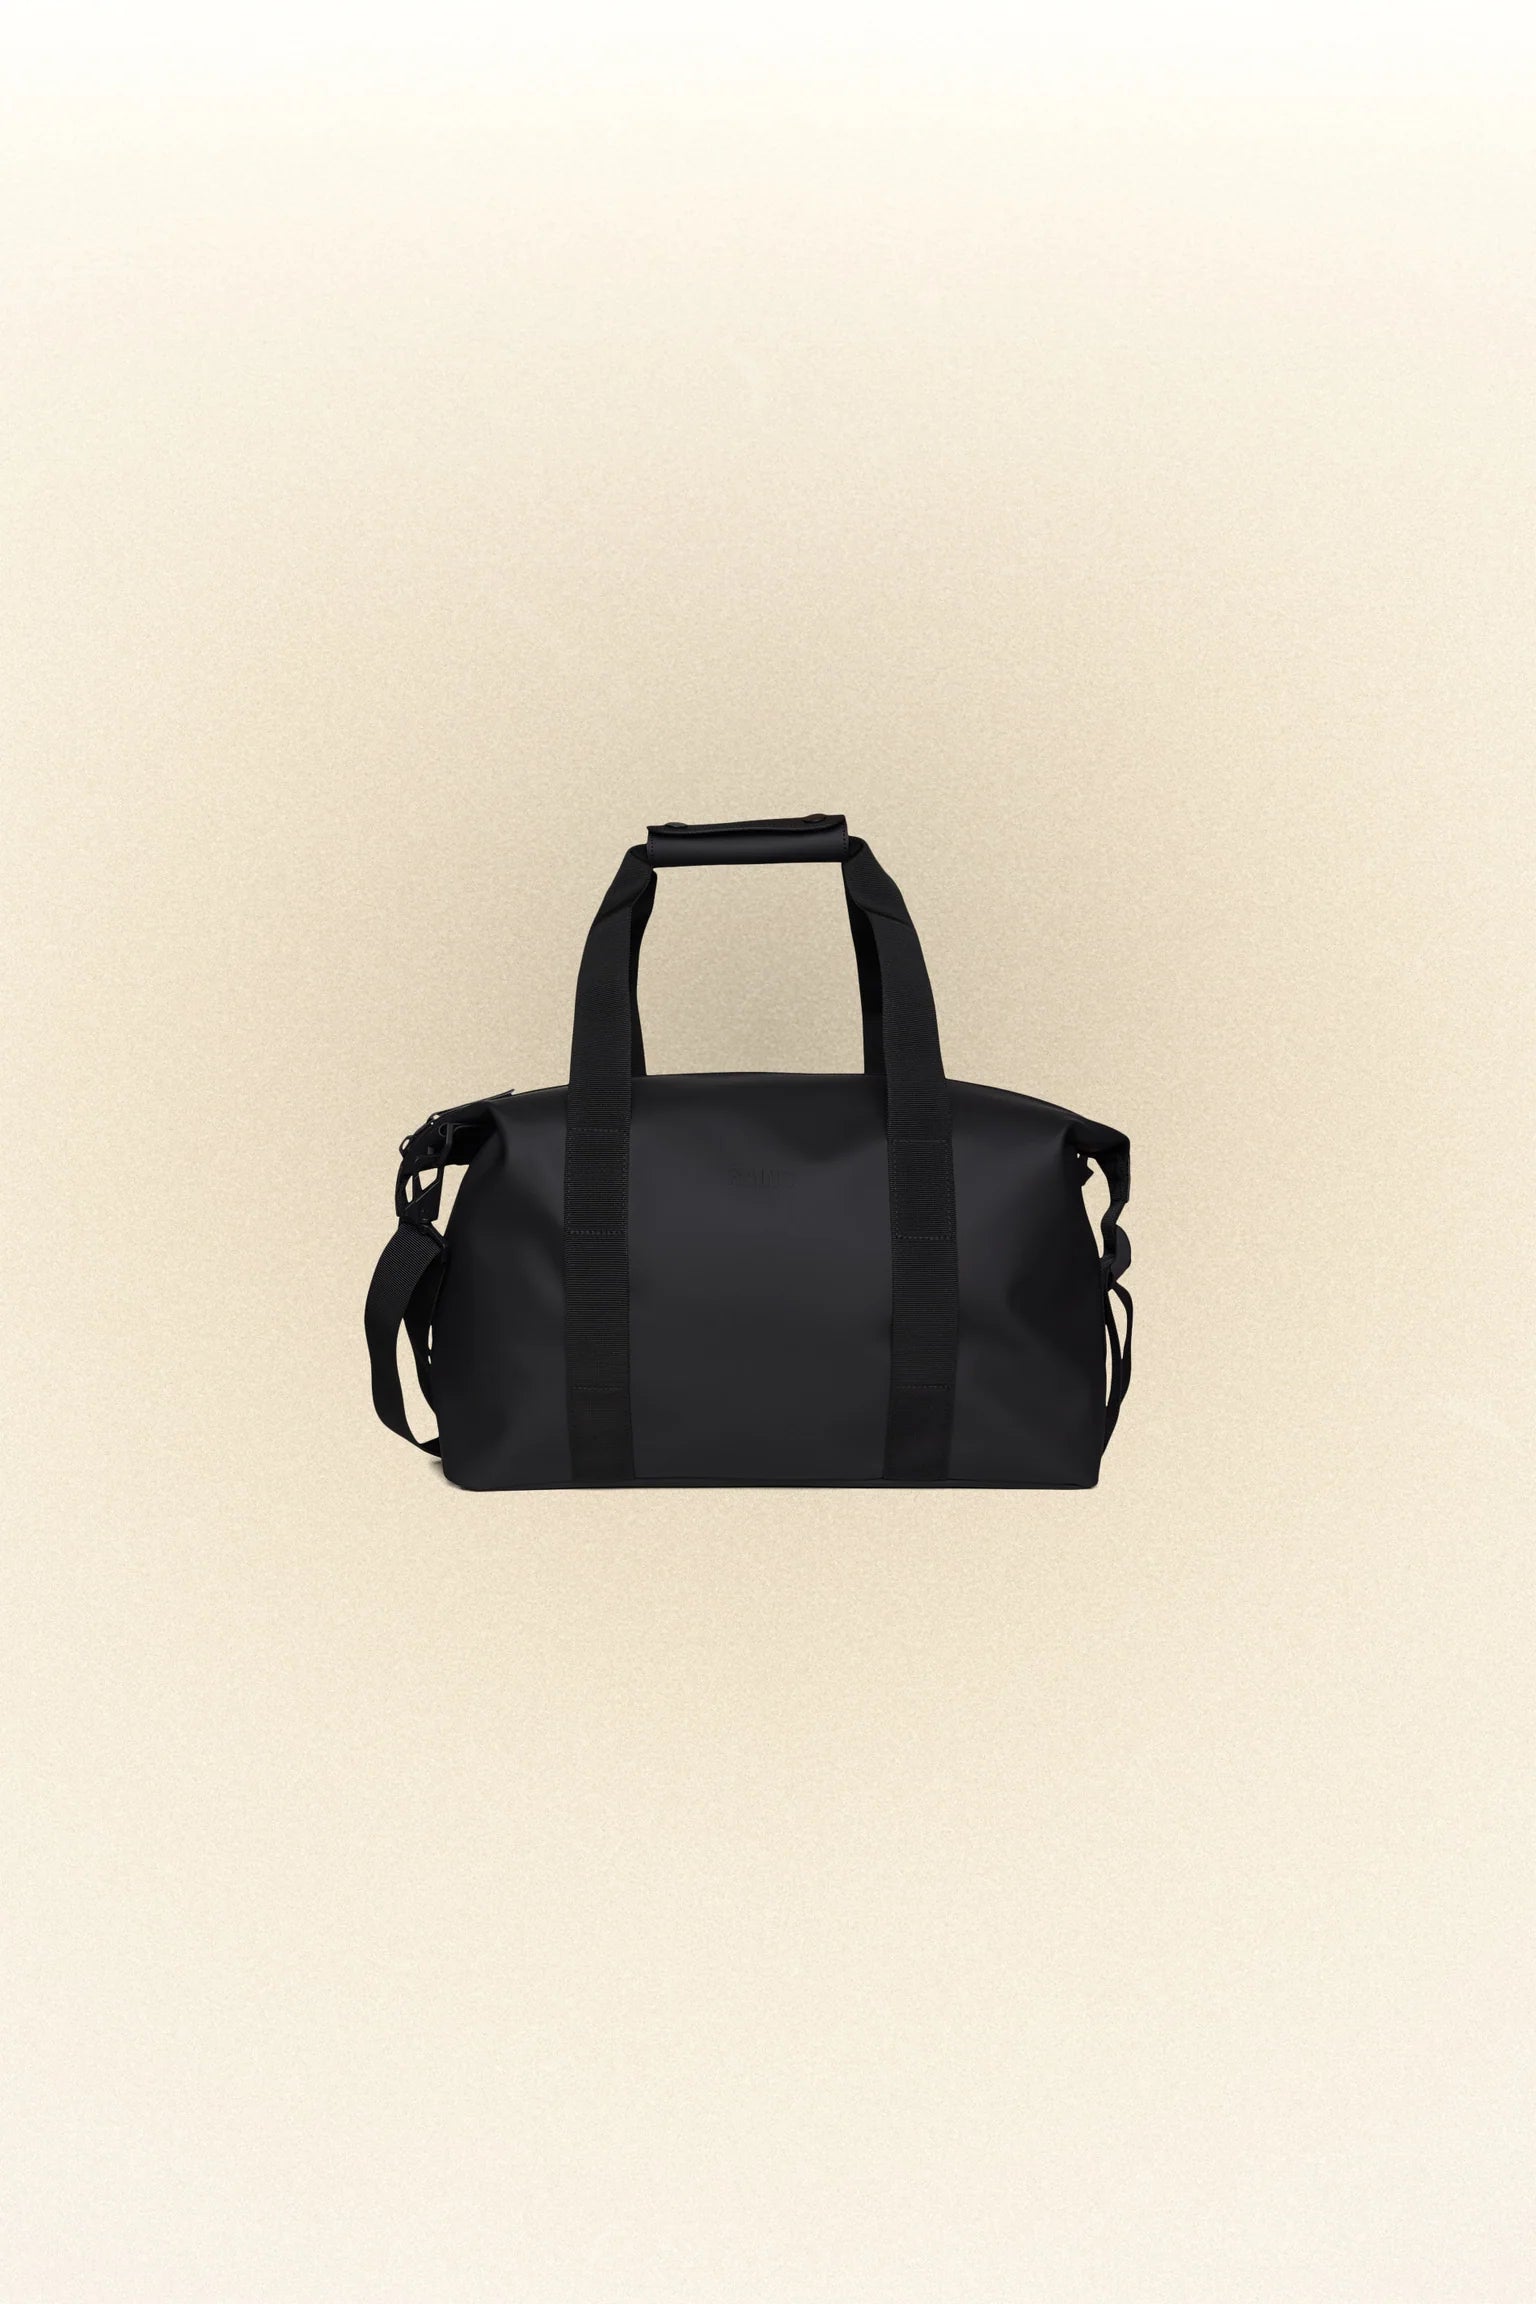 A small, Hilo Weekend Bag Small - Black by Rains on a white background.